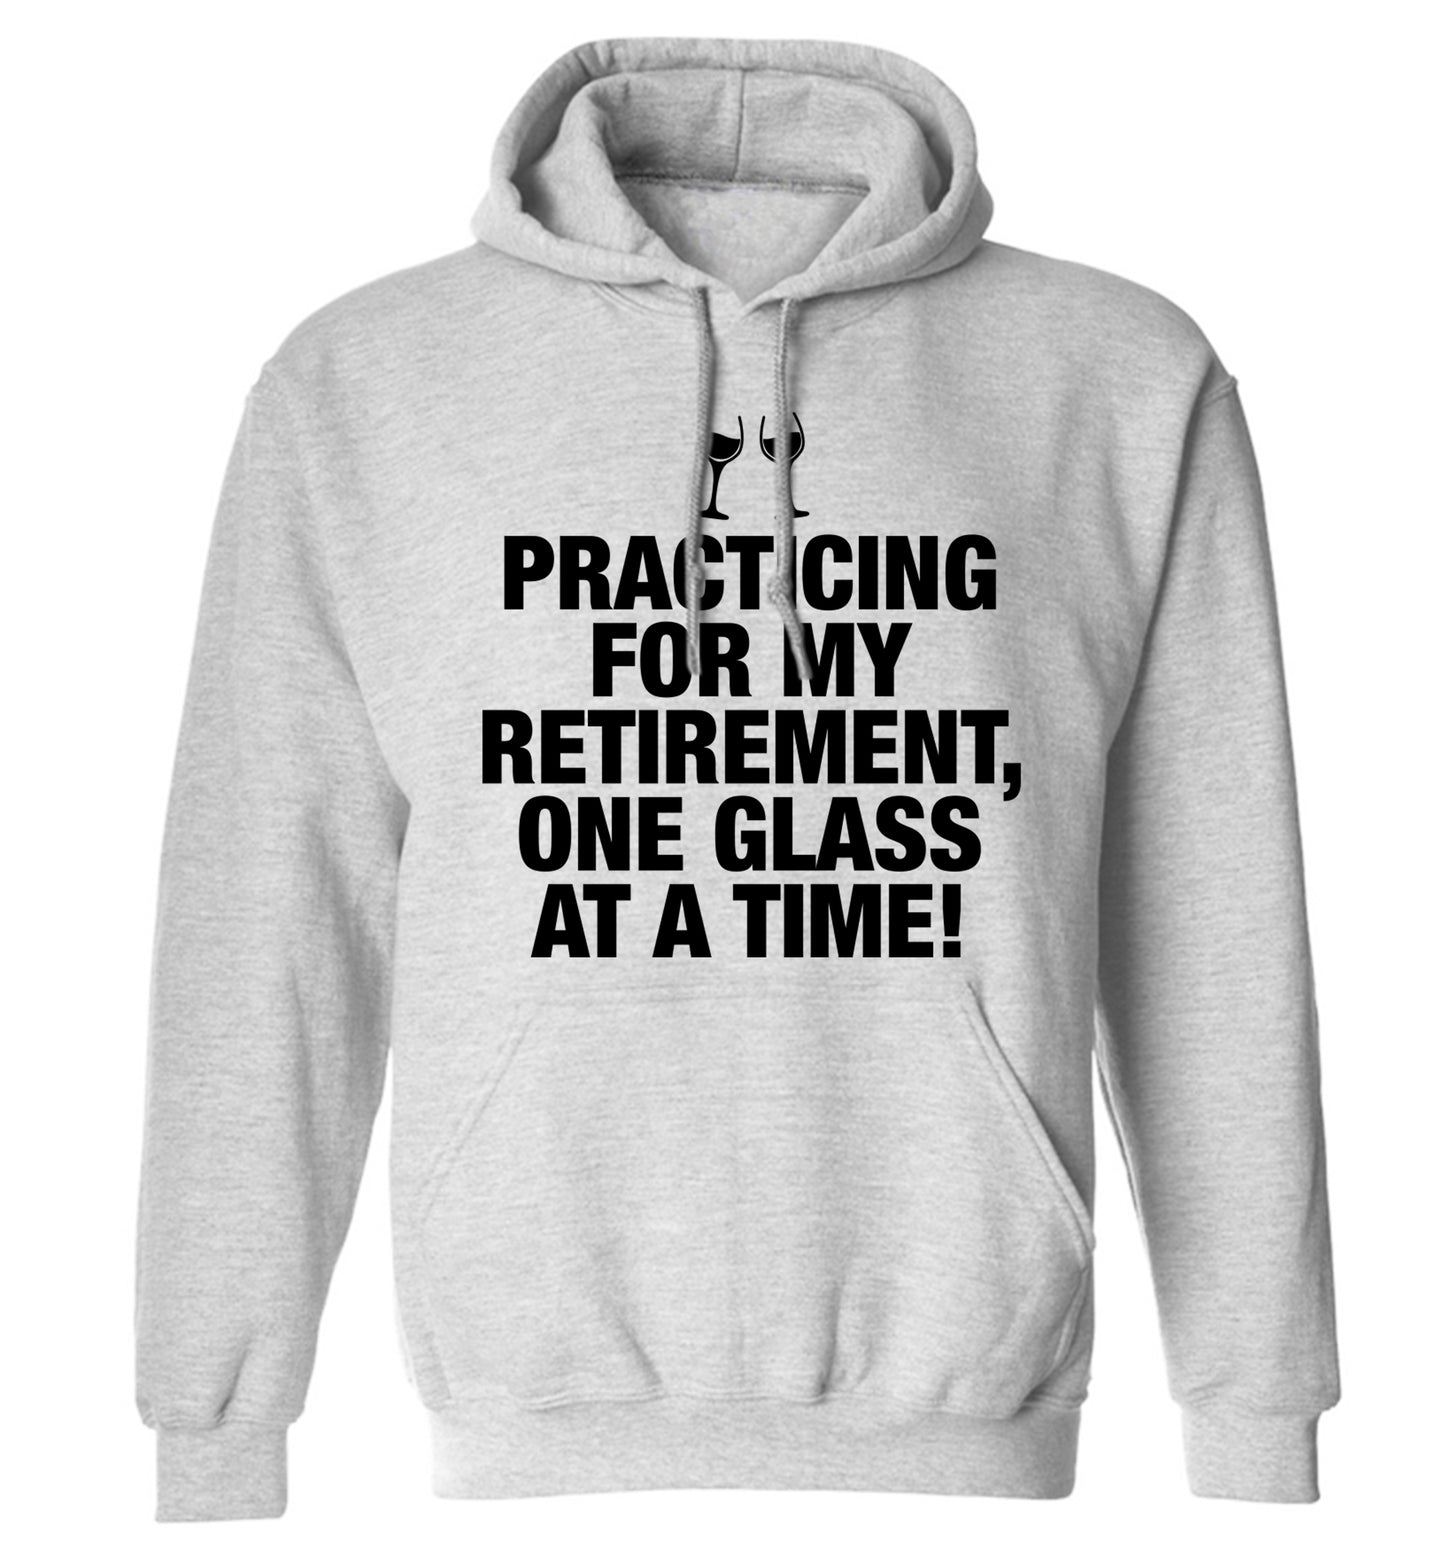 Practicing my retirement one glass at a time adults unisex grey hoodie 2XL